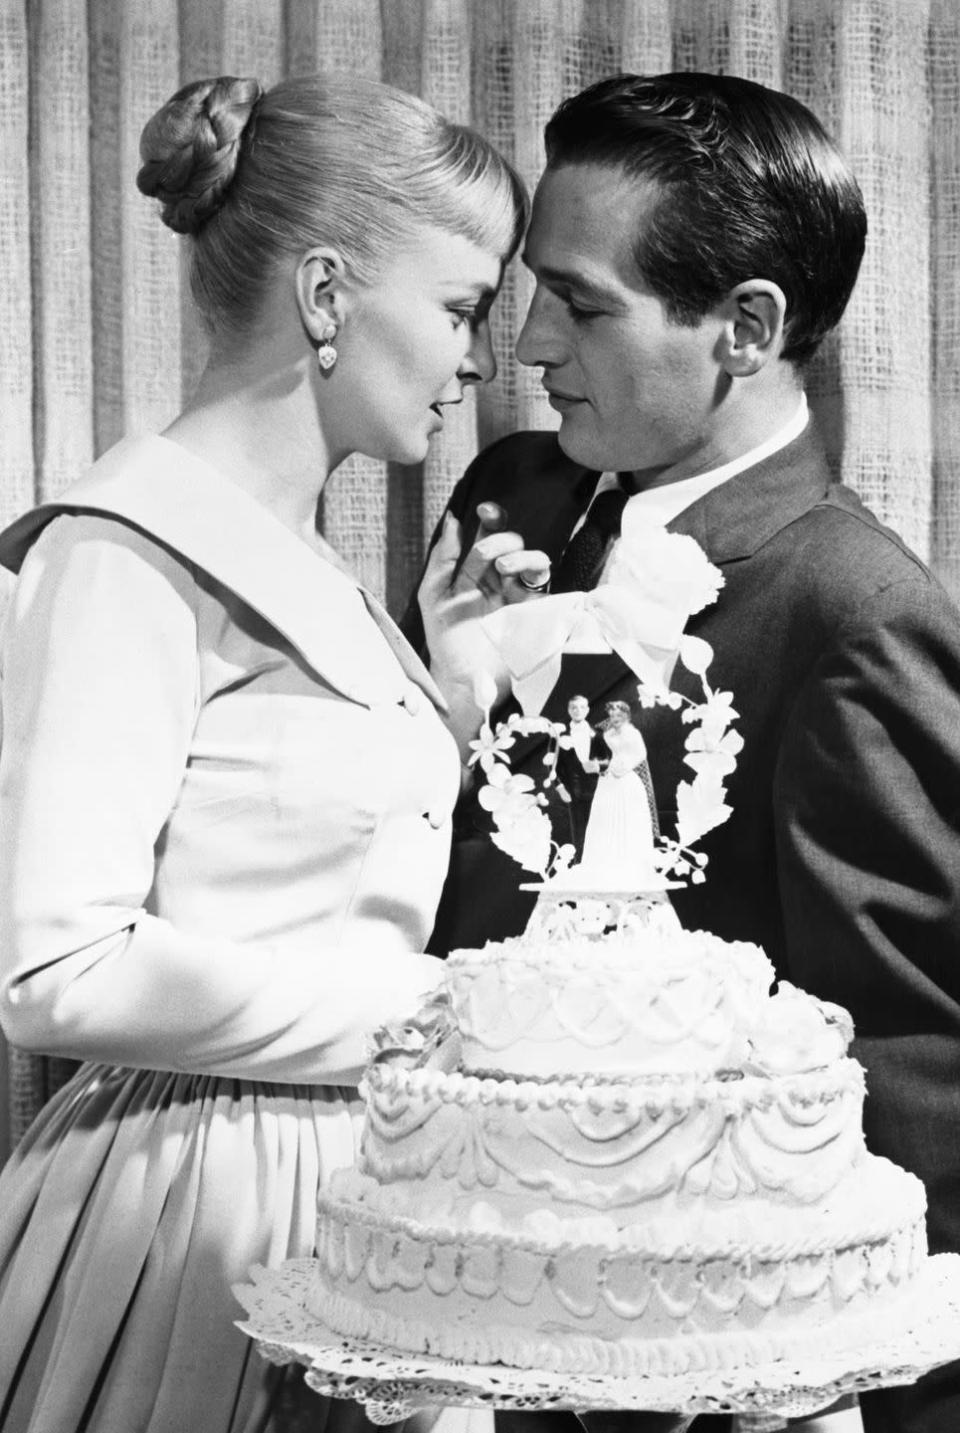 <p>Joanne Woodward and Paul Newman met on the set of <em>Picnic </em>in the early 1950s, but he was married to Jackie Witte at the time. In 1957, Newman divorced Witte and went on to marry Woodward the next year. They wed at the El Rancho Vegas and had a long and loving marriage until Newman's death in 2008.</p>